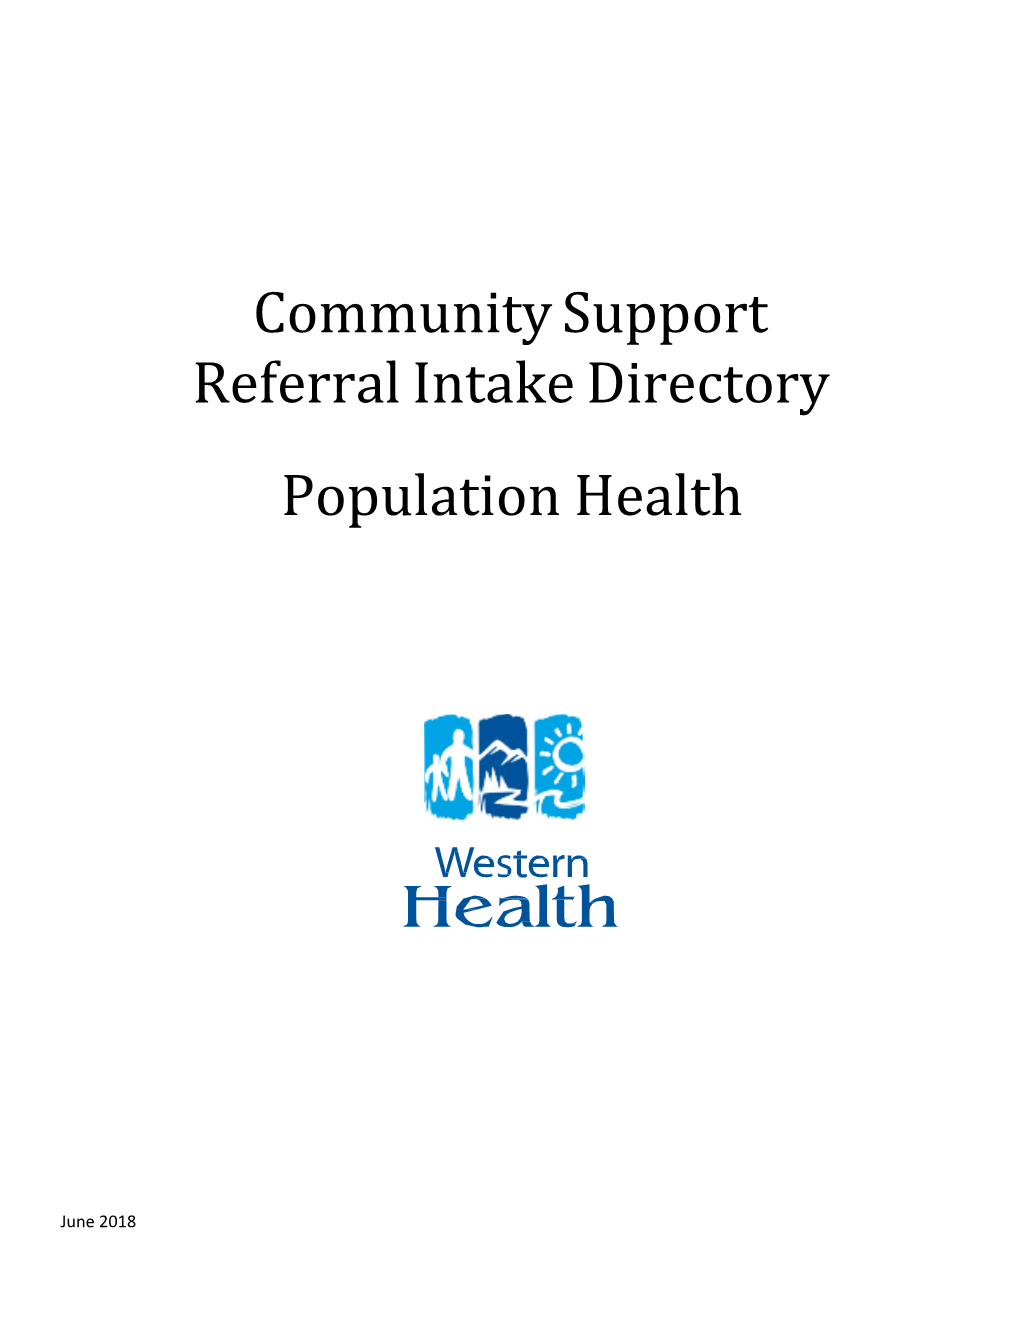 Community Support Referral Intake Directory (PDF)